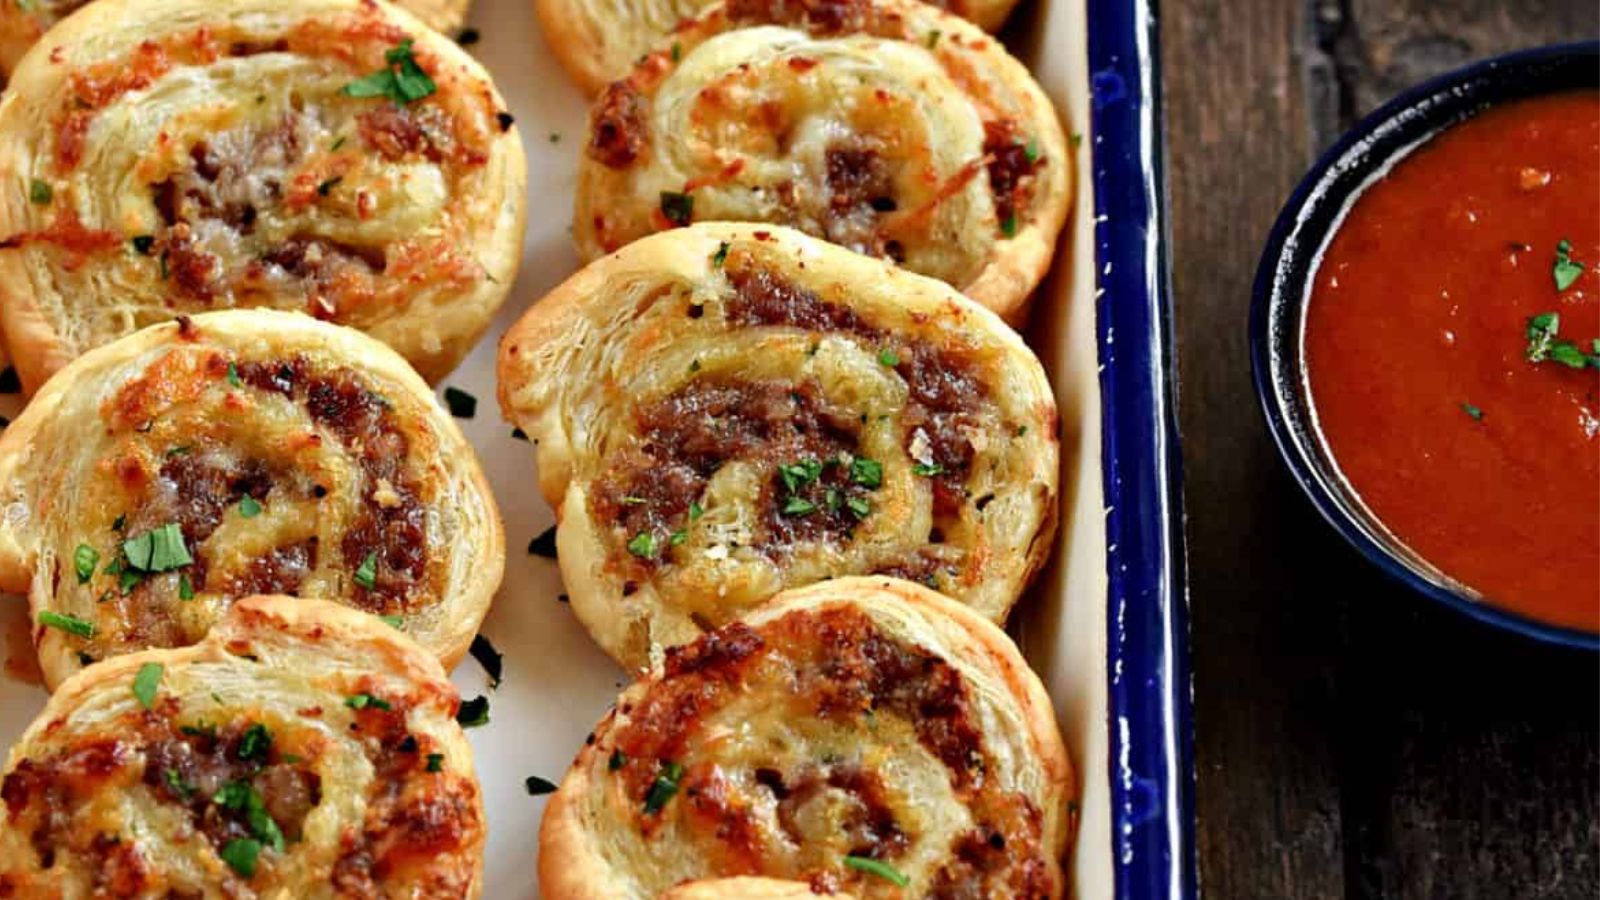 Puff pastry sausage pinwheels served with pizza sauce on a plate.